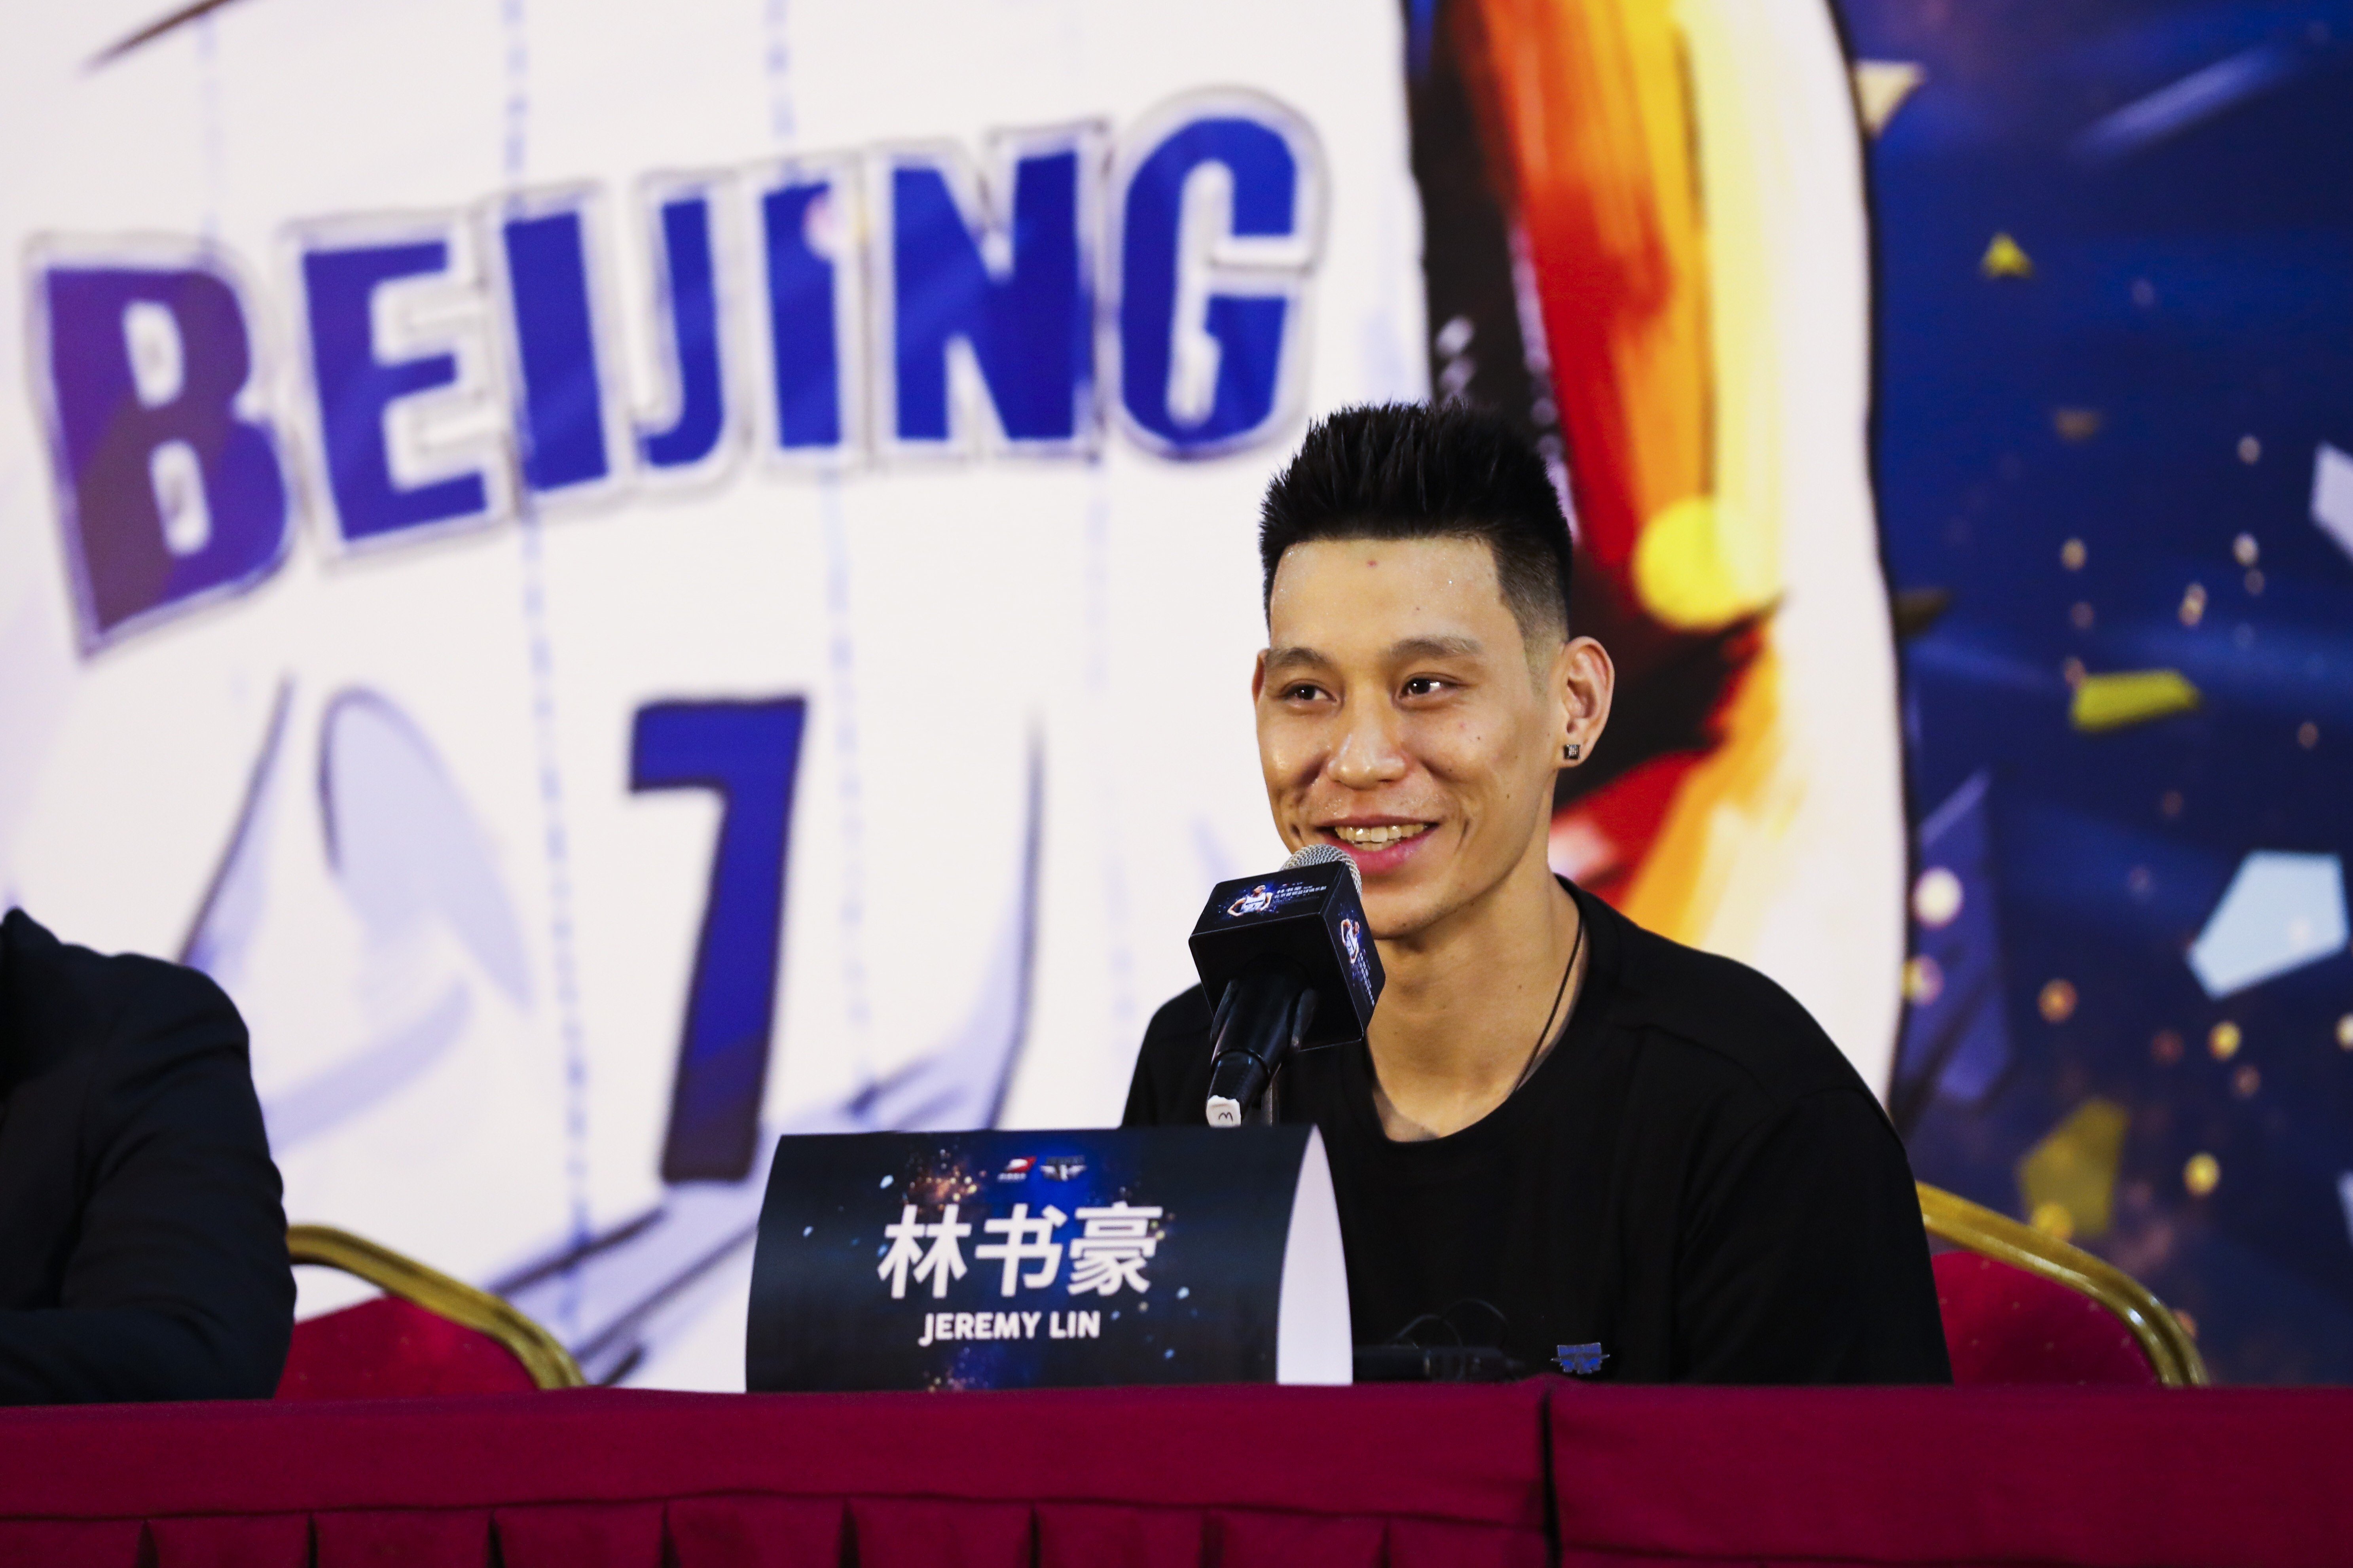 Jeremy Lin hints at retirement in Twitter post after G League season ends  without NBA call